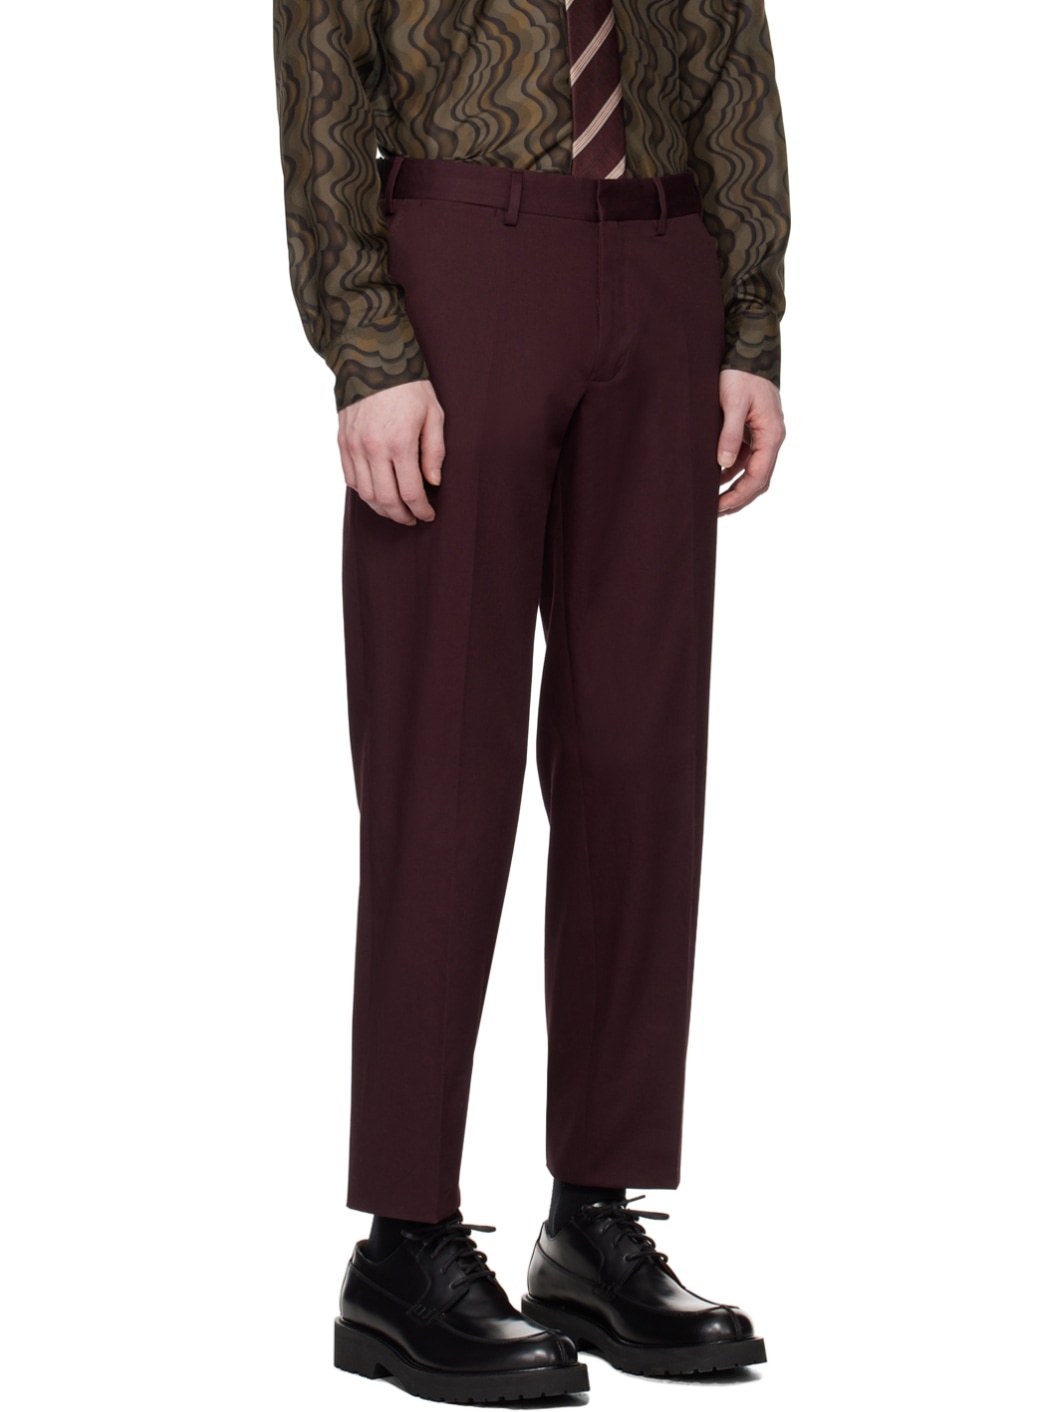 Burgundy Soft Constructed Suit - 4